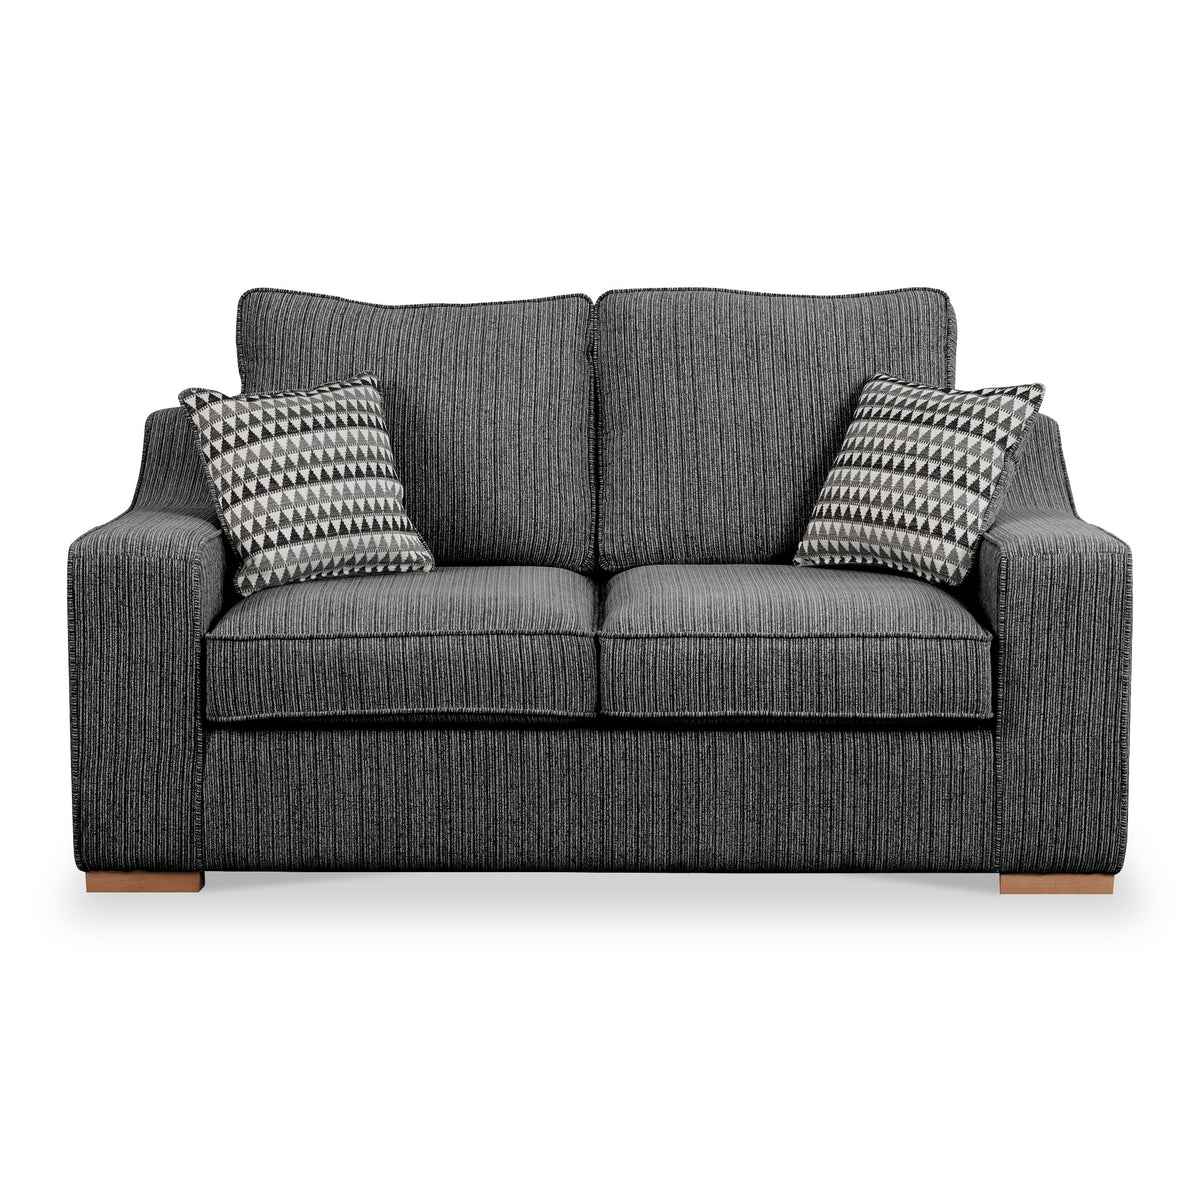 Ashow Charcoal 2 Seater Sofabed with Maika Dusk Scatter Cushions from Roseland Furniture